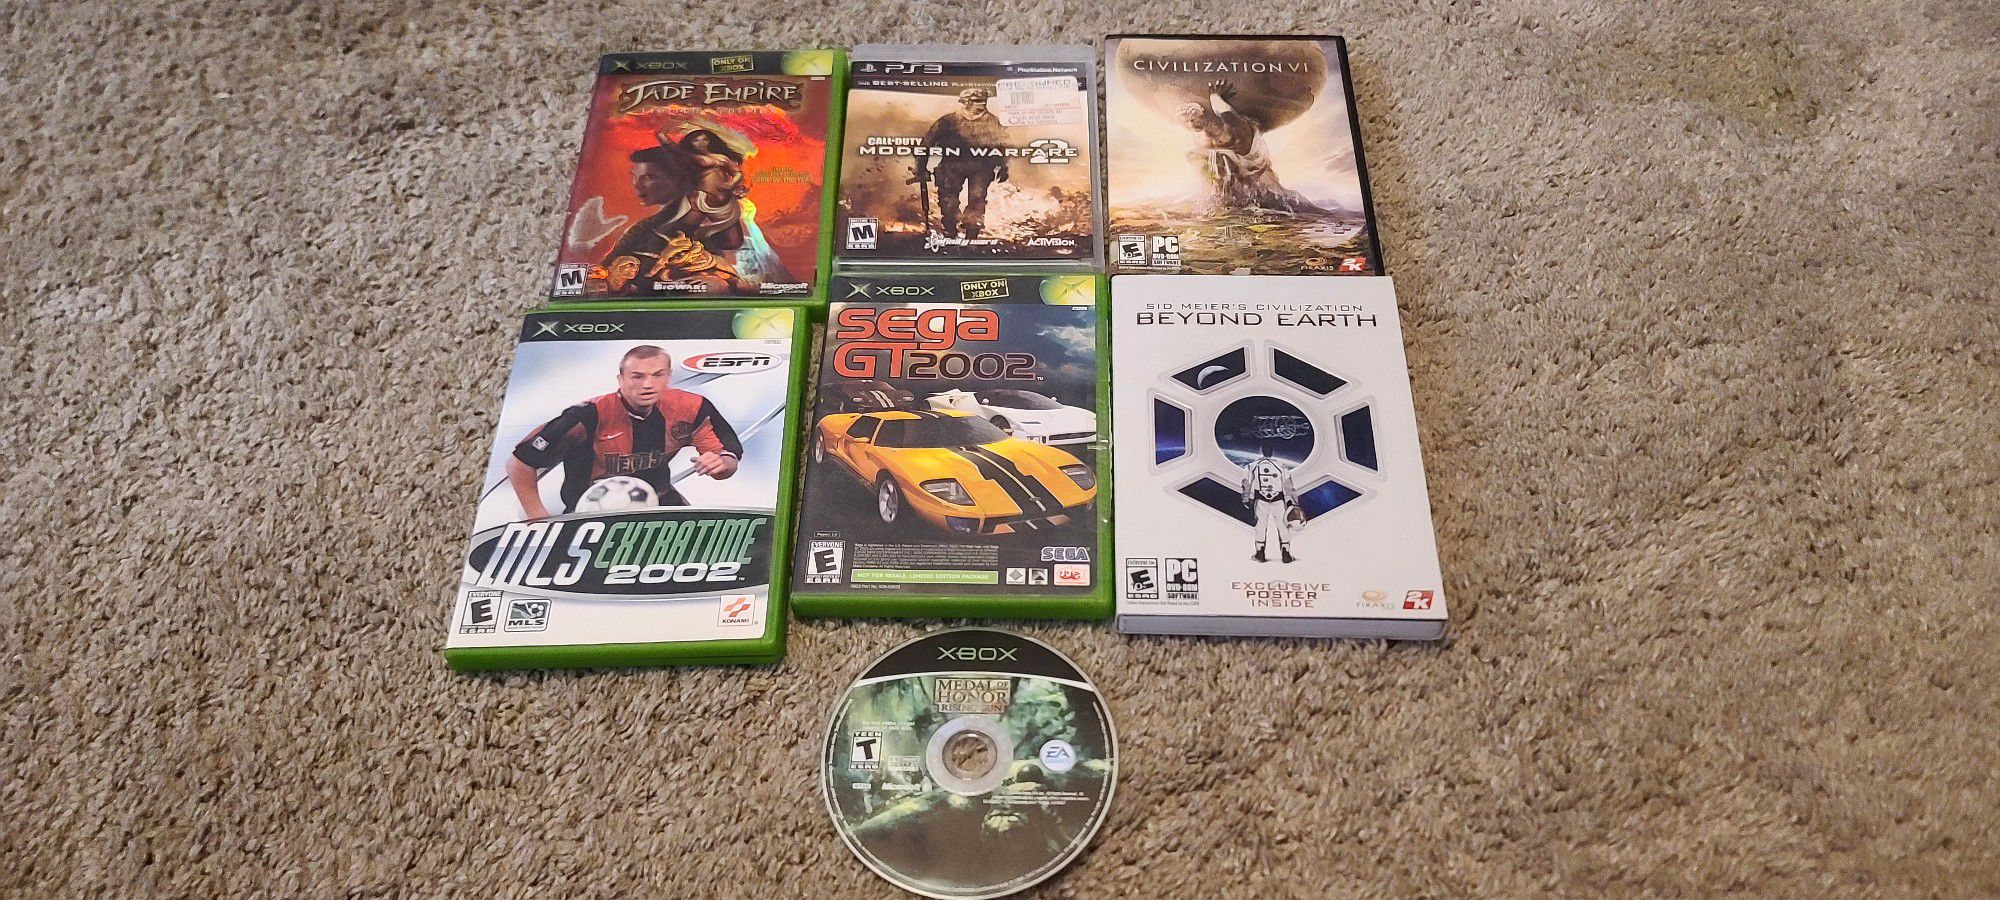 OG Xbox Games, Ps3 Game, 2 PC Games One Comes With Poster